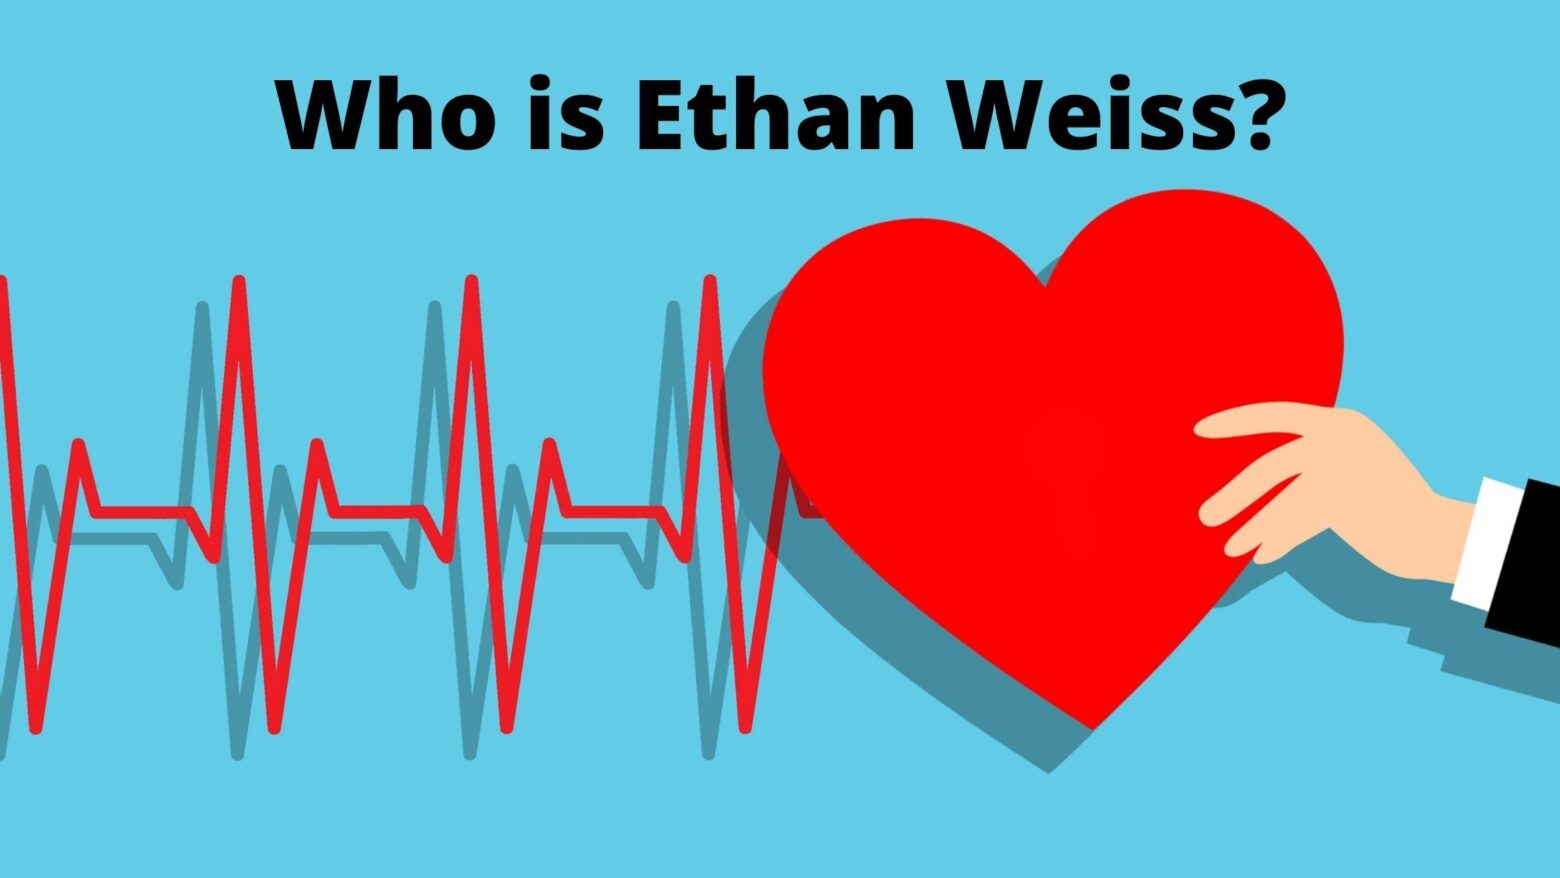 Who is Ethan Weiss?